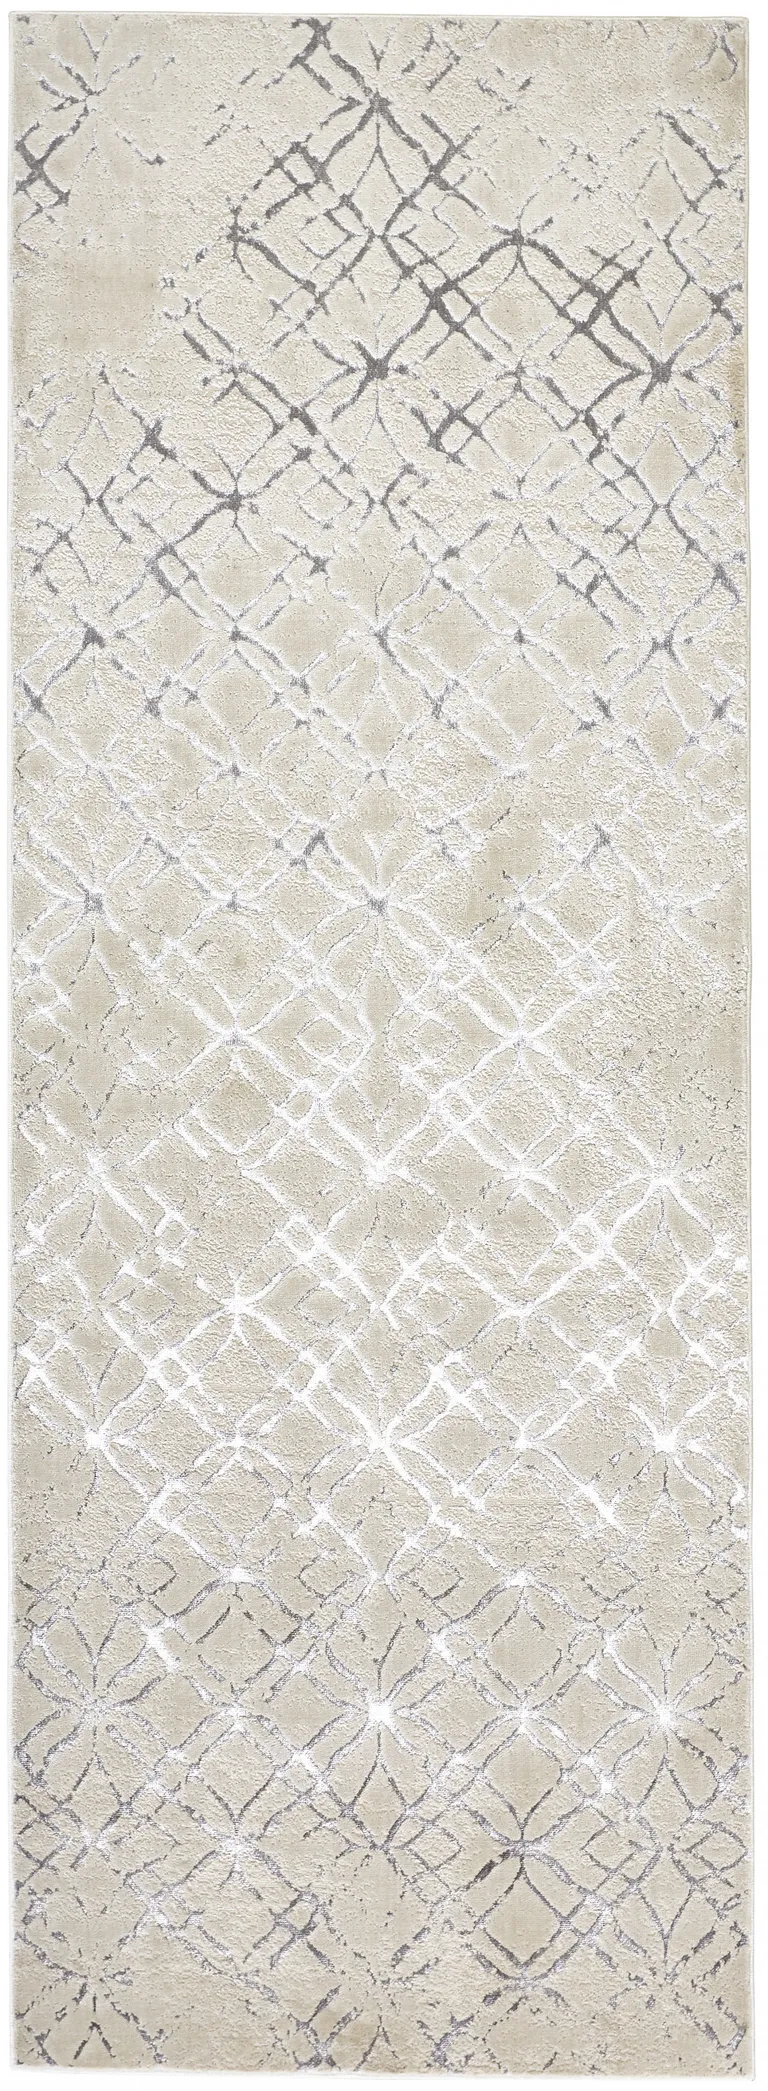 8' Silver Gray And White Abstract Stain Resistant Runner Rug Photo 1